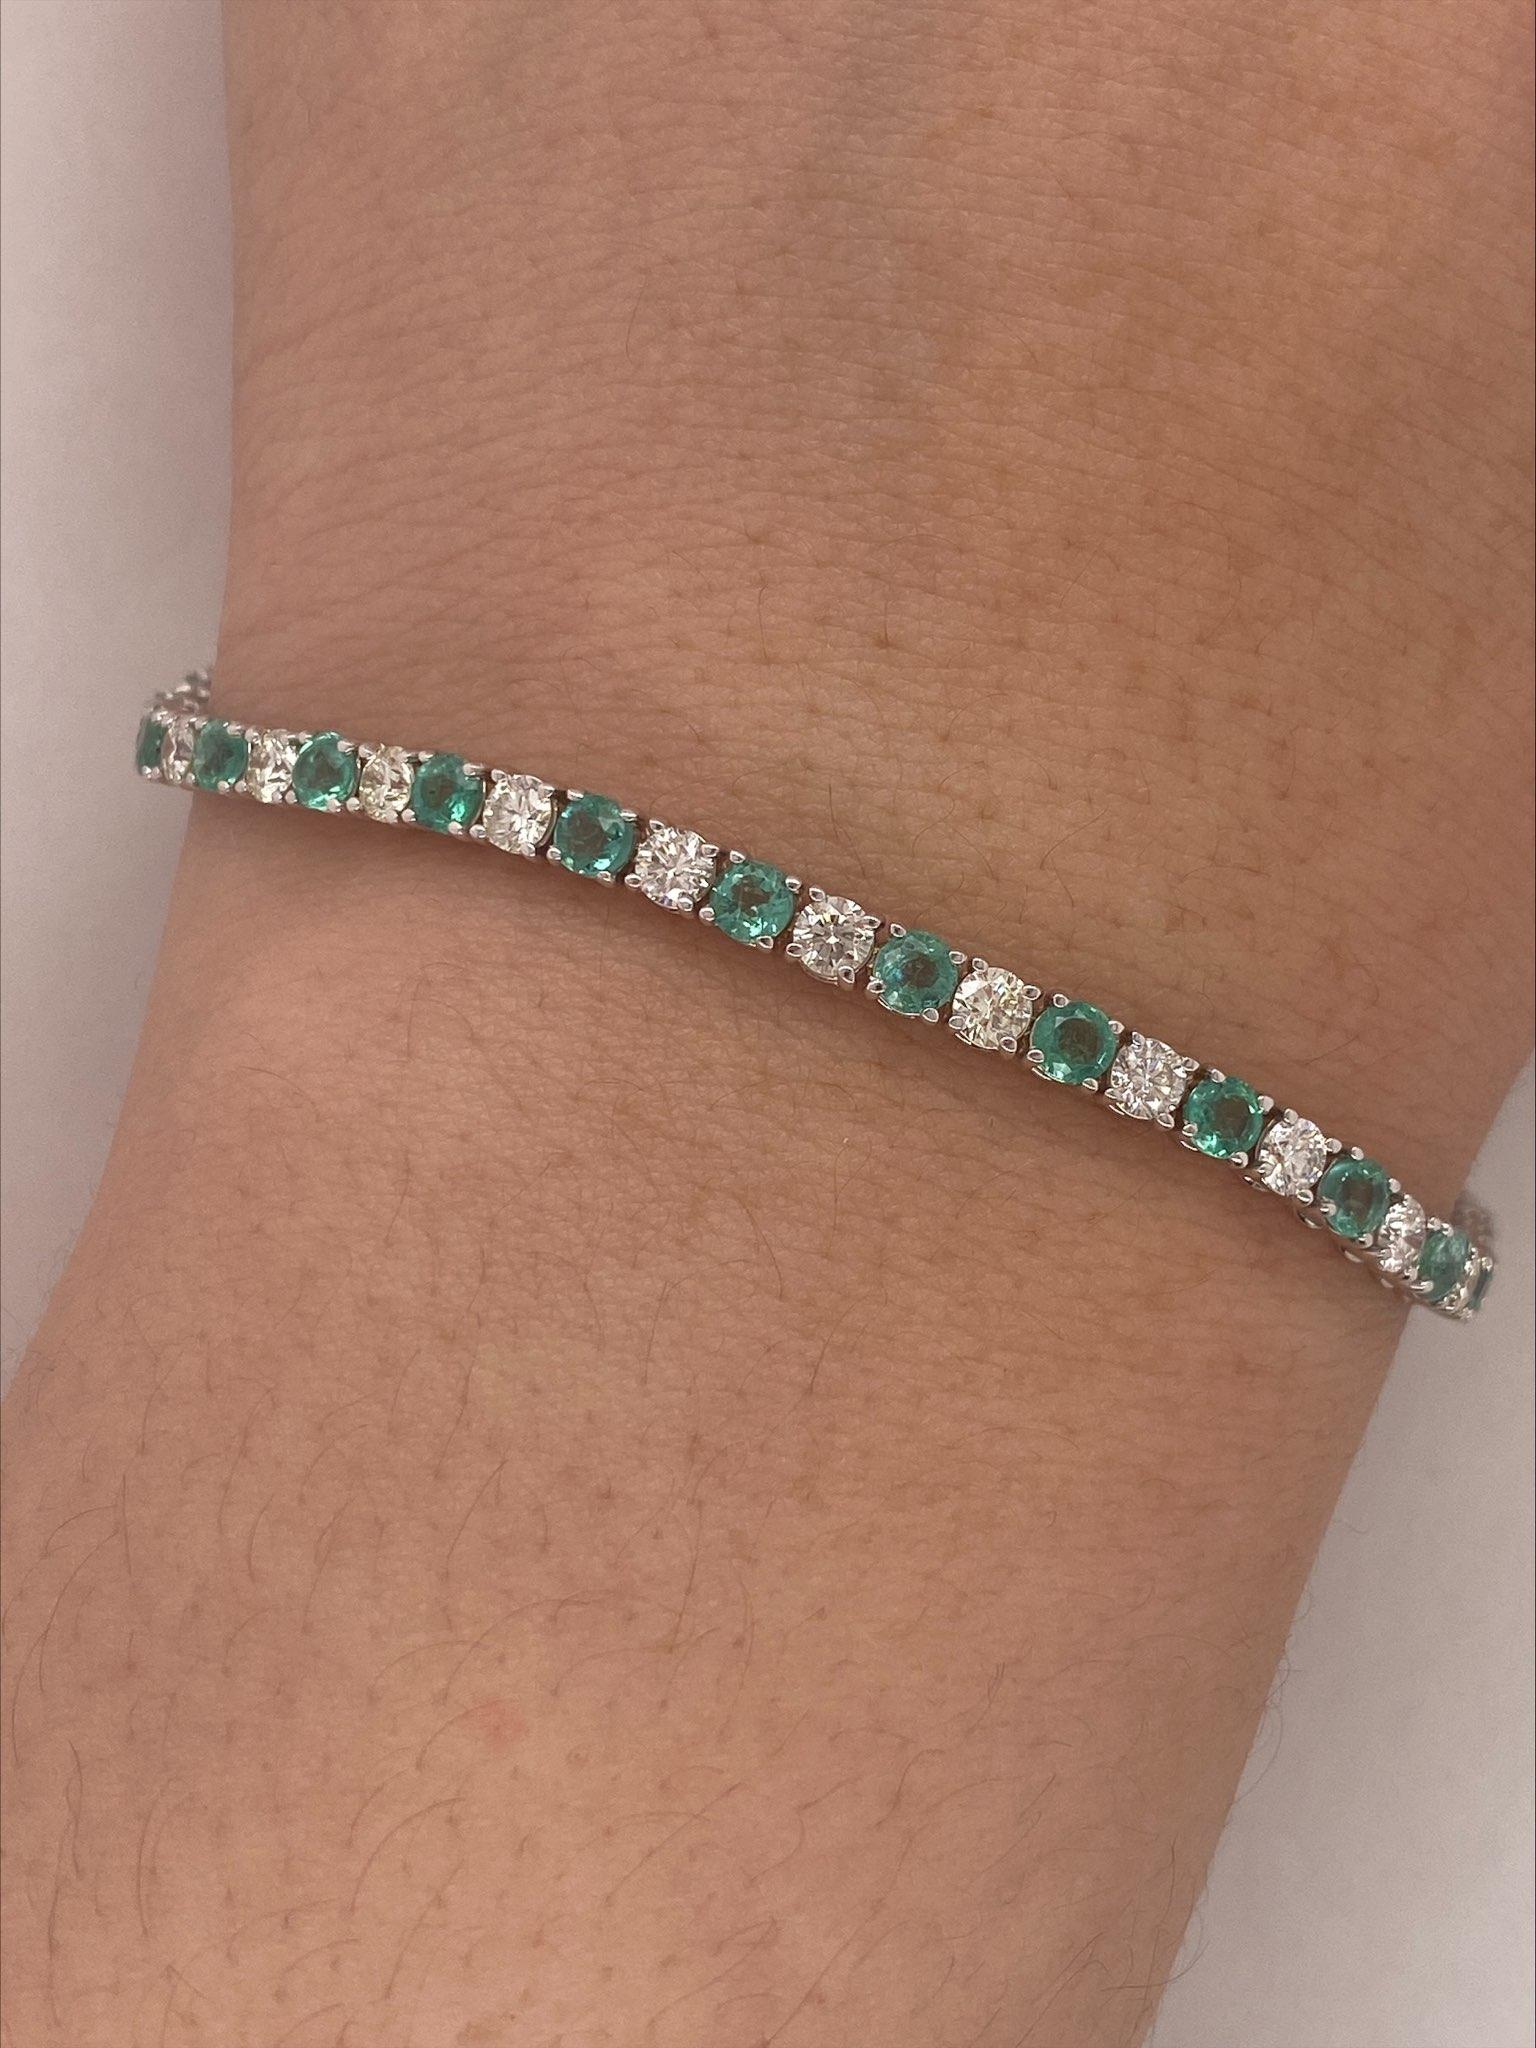 6.90 Carat Natural Emerald and Diamond Bracelet G SI 14K White Gold 7''

100% Natural Diamonds and Emeralds
6.90 CTW (Diamonds - 2.55CT, Emeralds - 4.35CT)
Dia Color: G-H 
Dia Clarity: SI  
14K White Gold, prong style
7 inches in